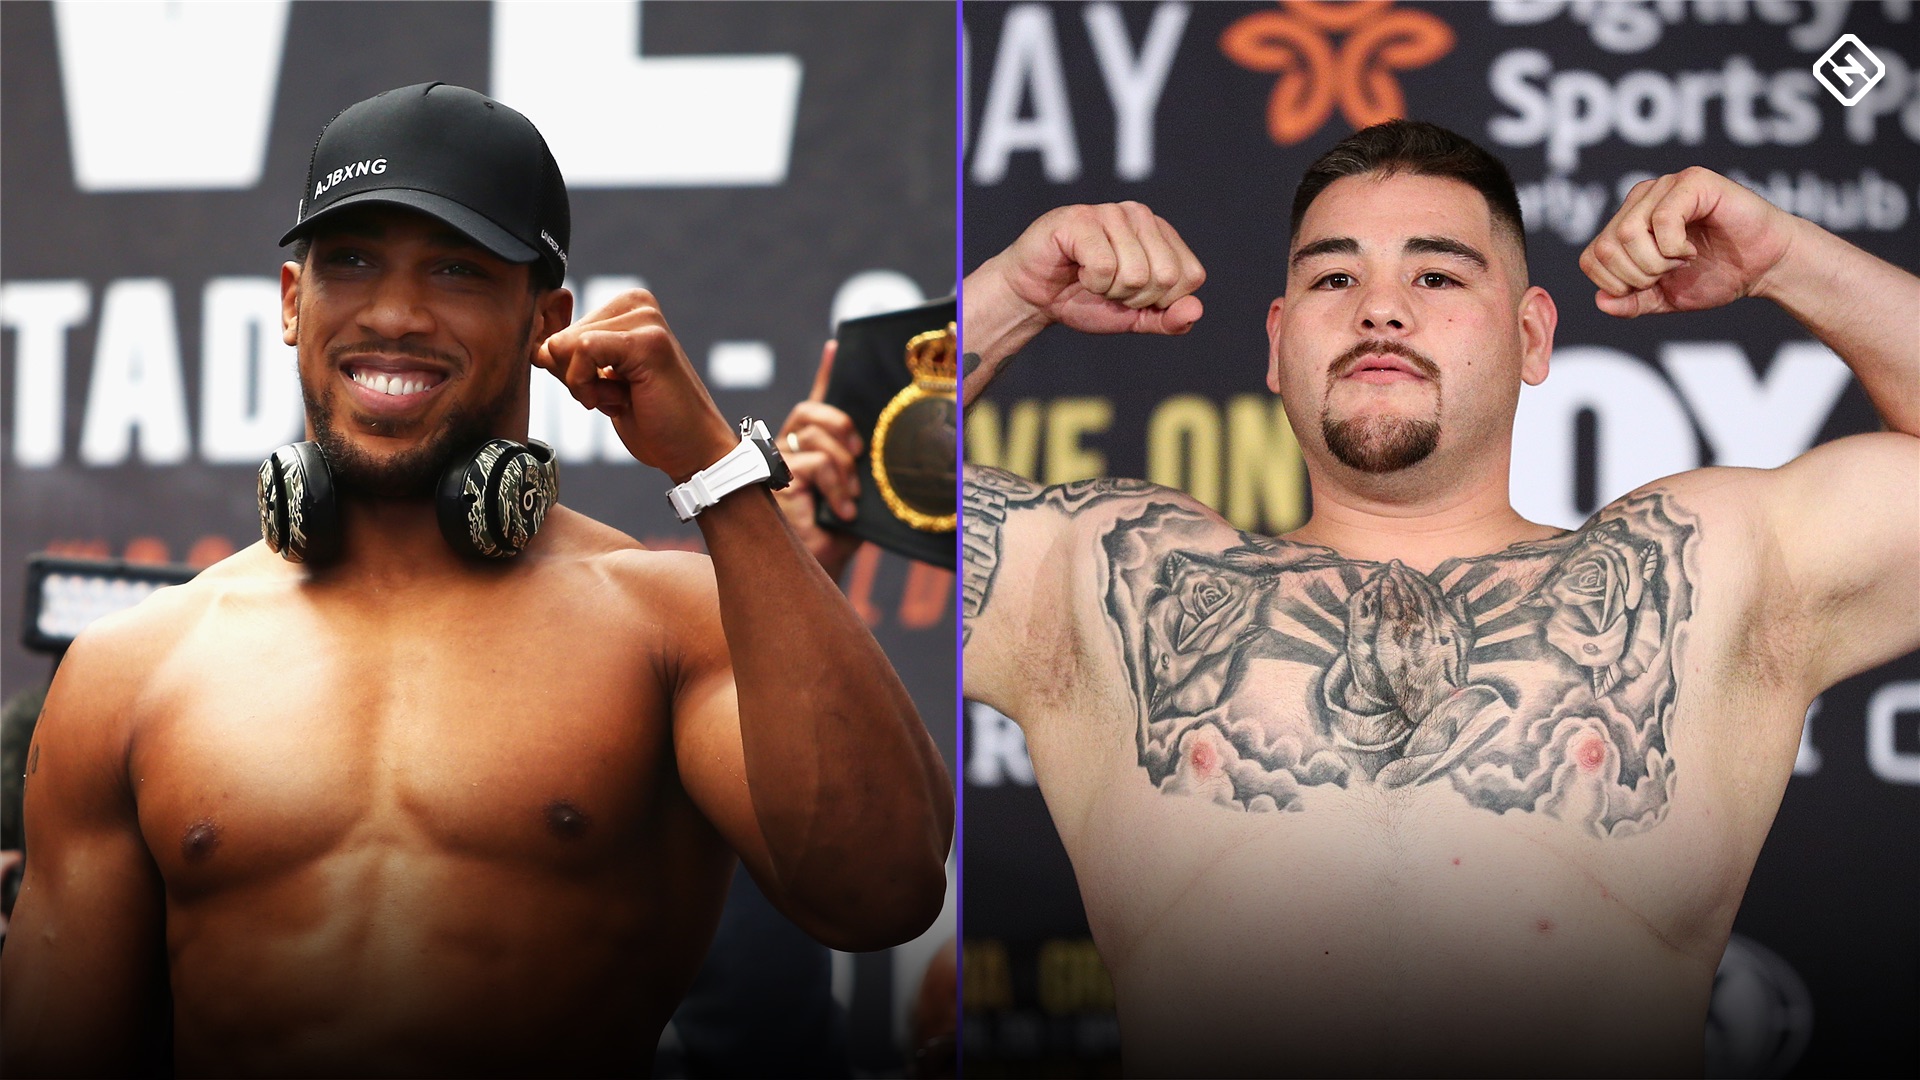 Vinnys Views Anthony Joshua Vs Andy Ruiz The Stats, The Facts and The Ringside Report Fight Prediction is In!